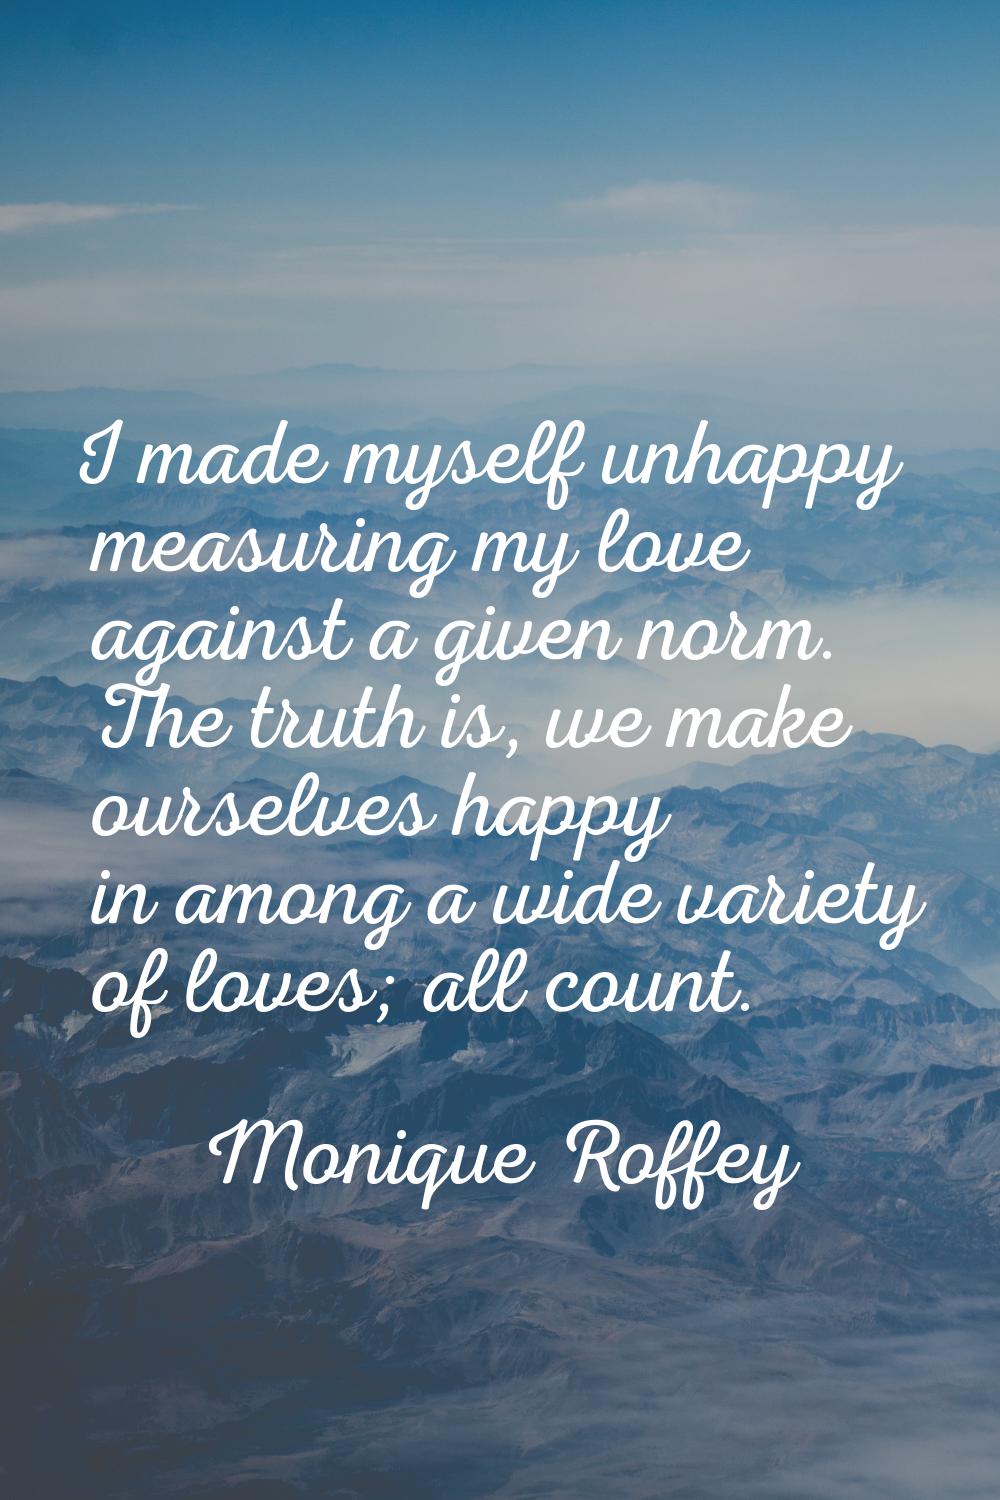 I made myself unhappy measuring my love against a given norm. The truth is, we make ourselves happy